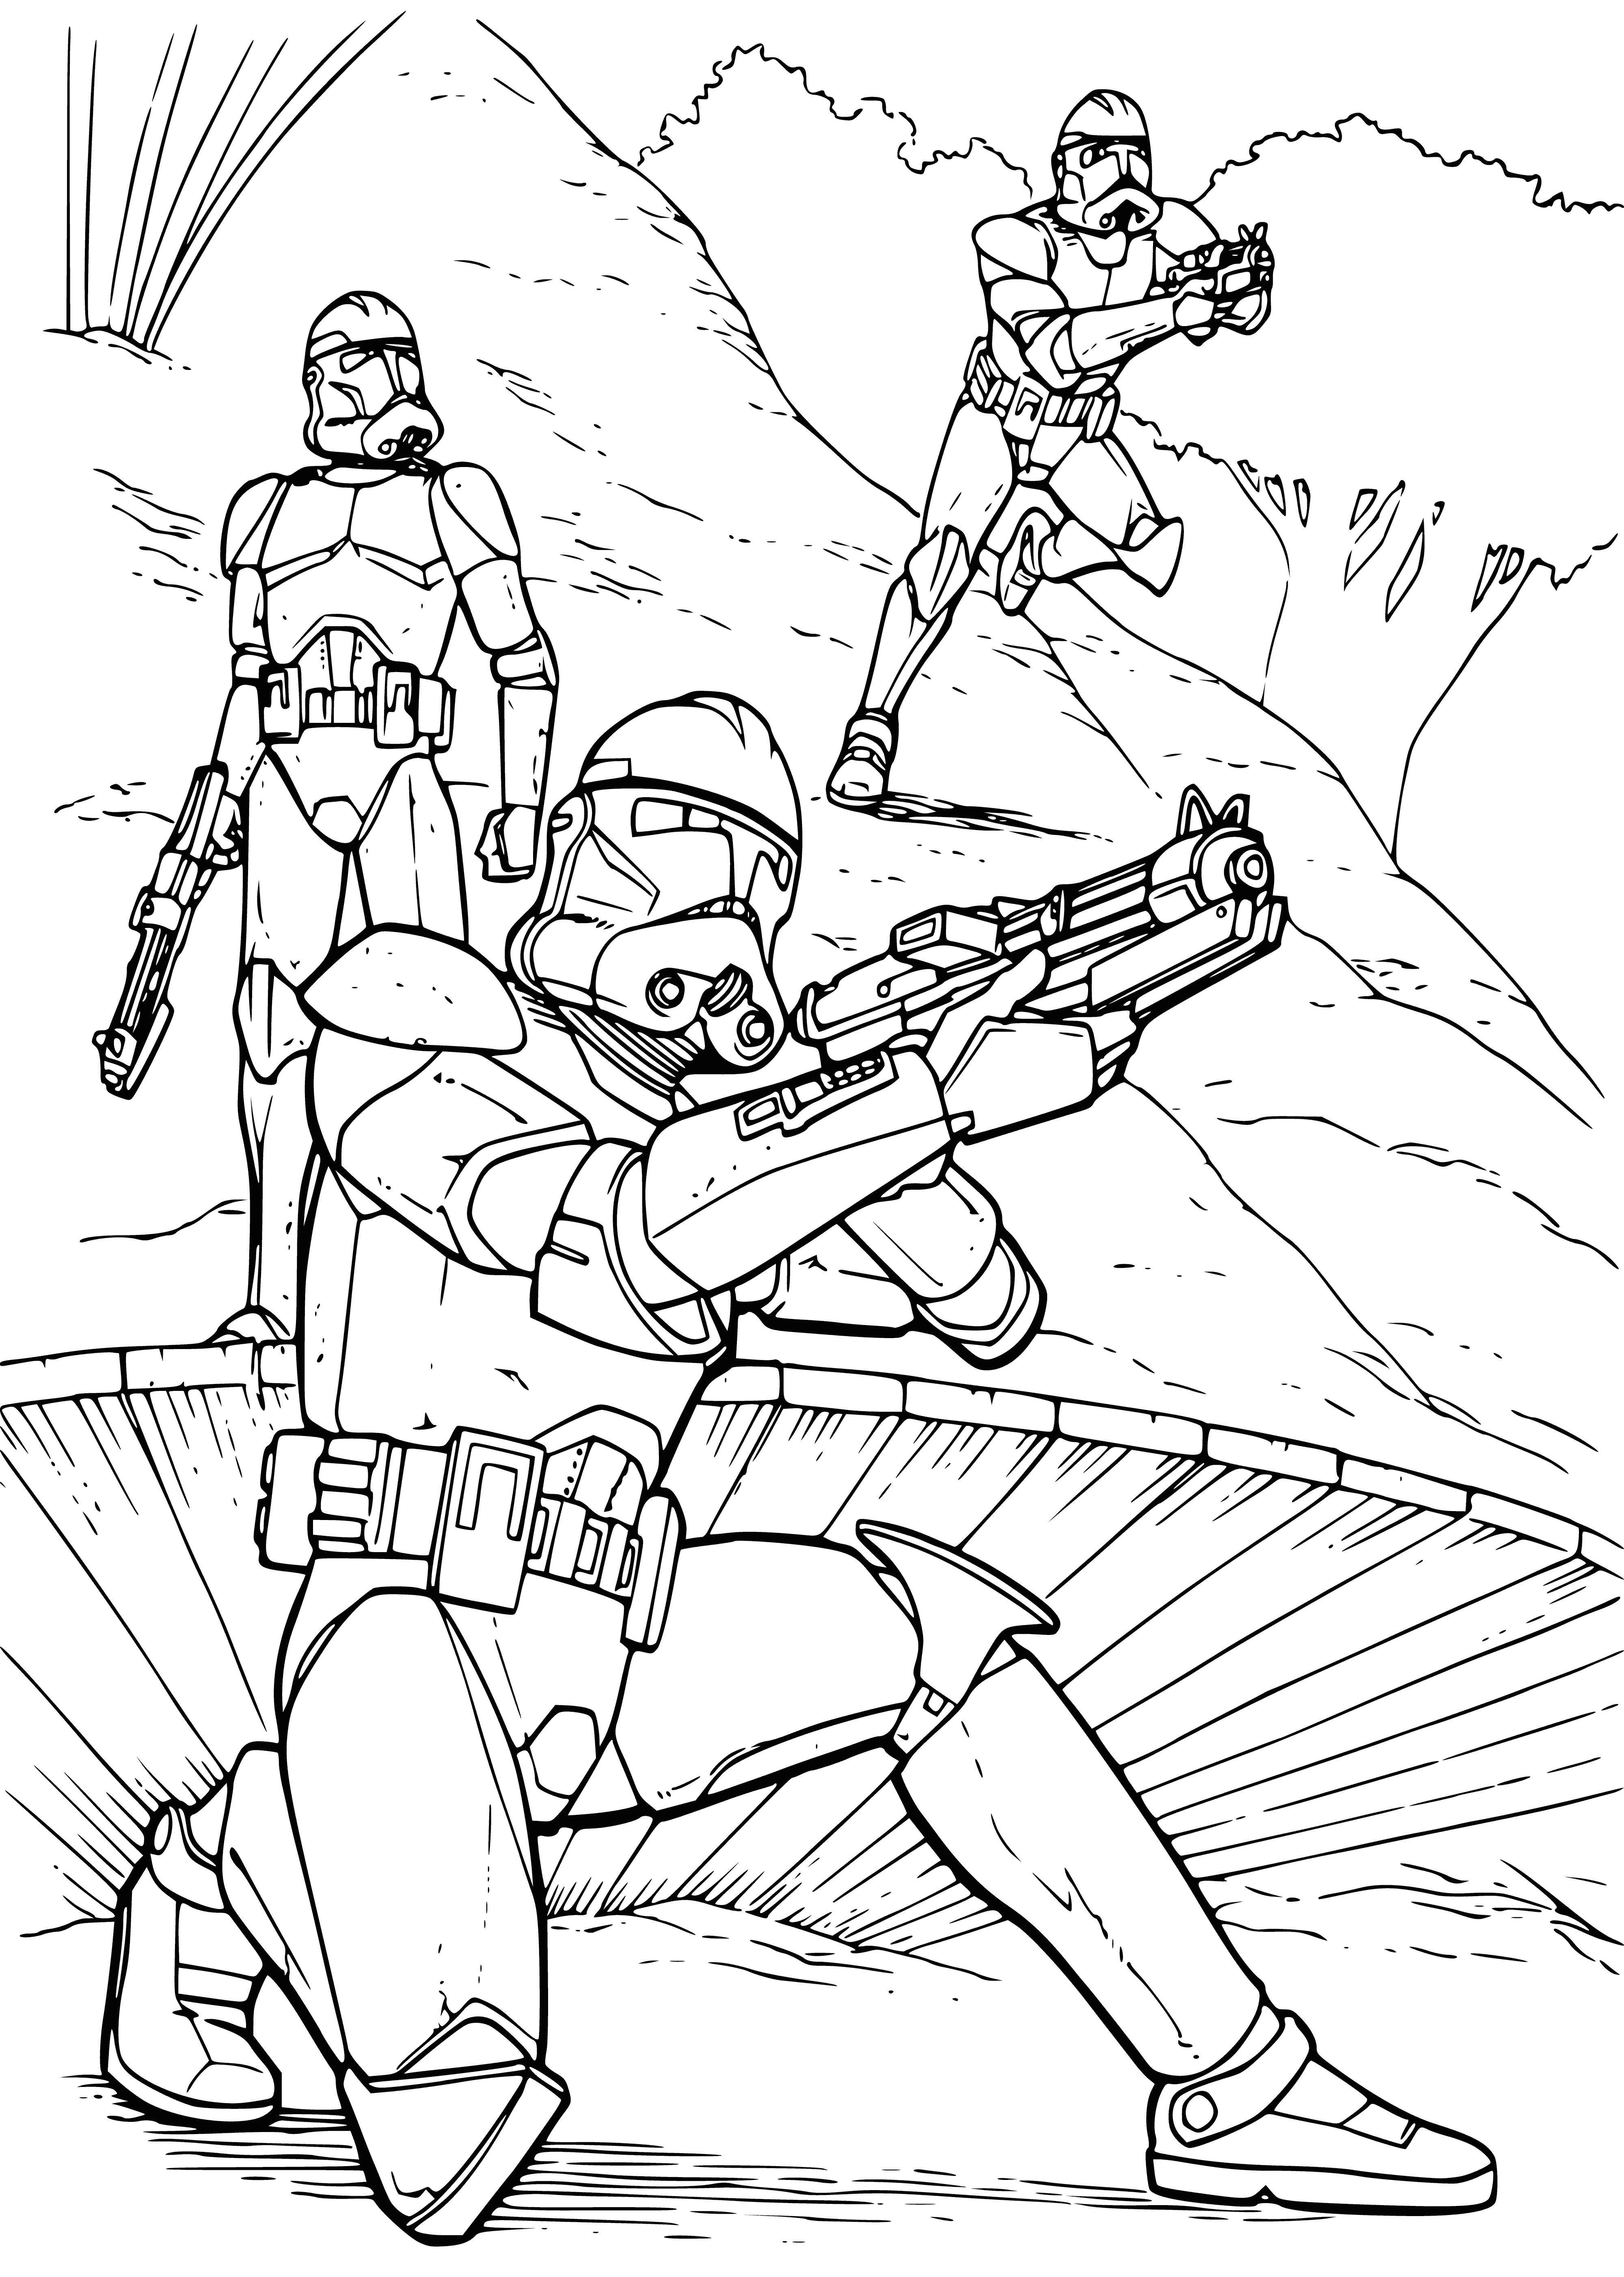 coloring page: Stormtroopers in white armor and helmets w/ black visors line up, guns pointed forward.